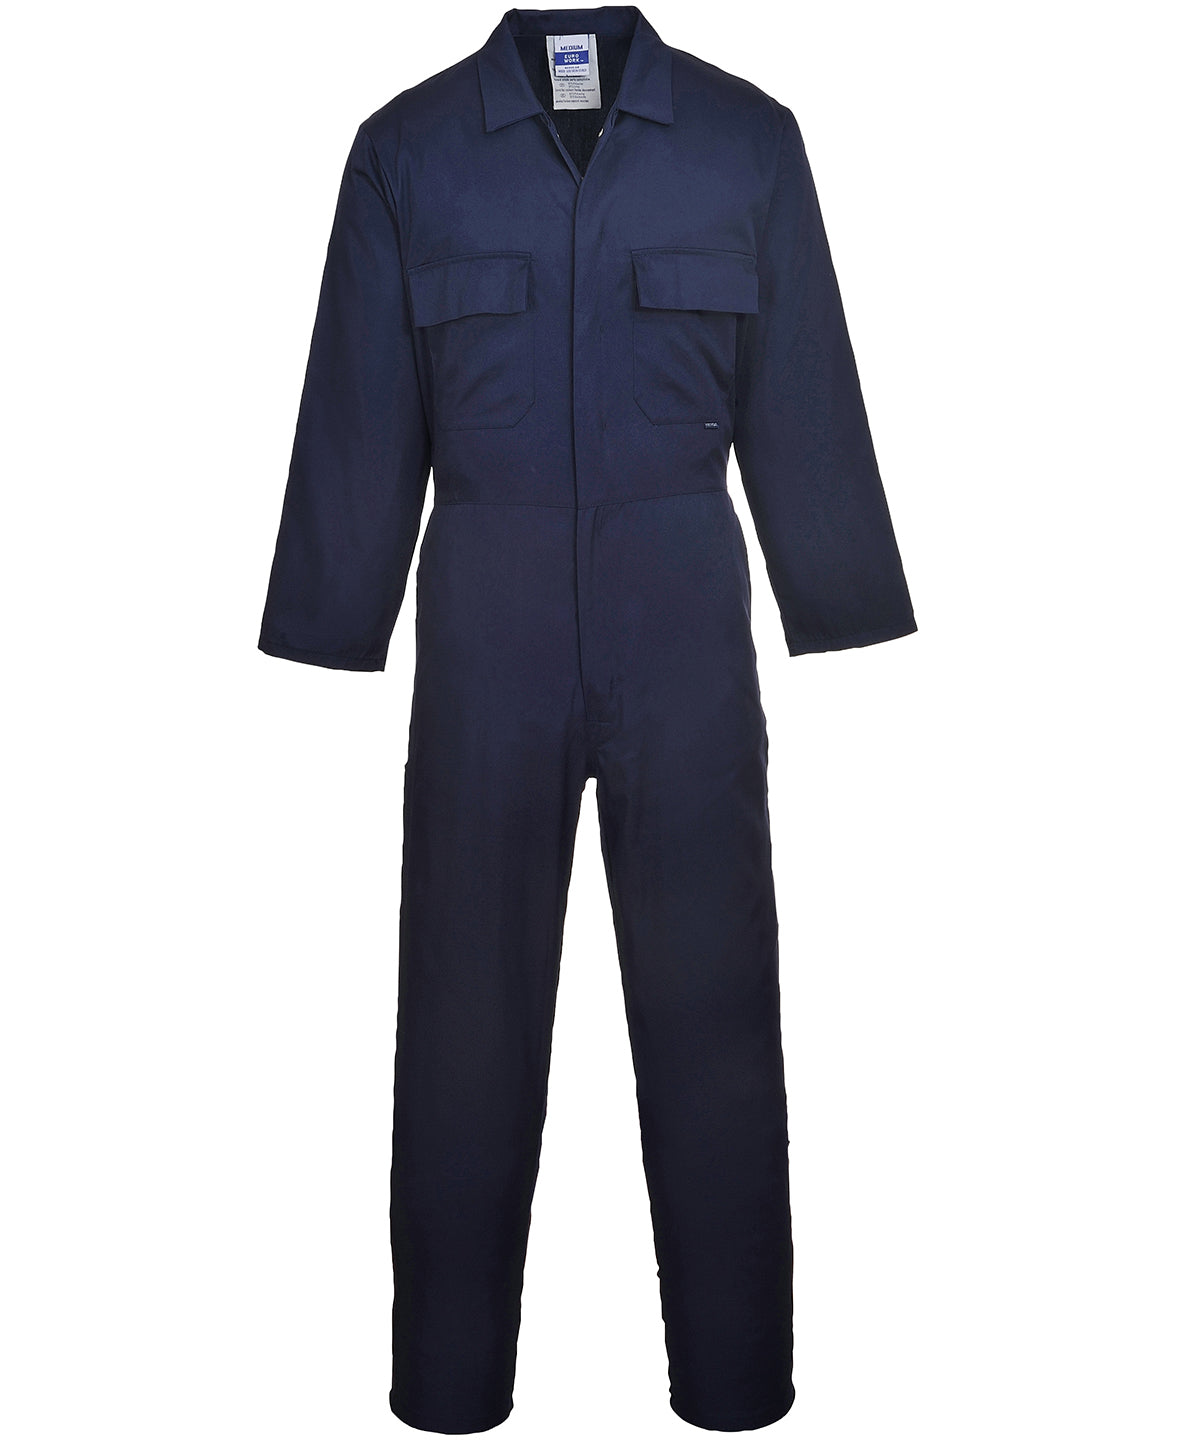 Personalised Coveralls - Bottle Portwest Euro work coverall (S999)